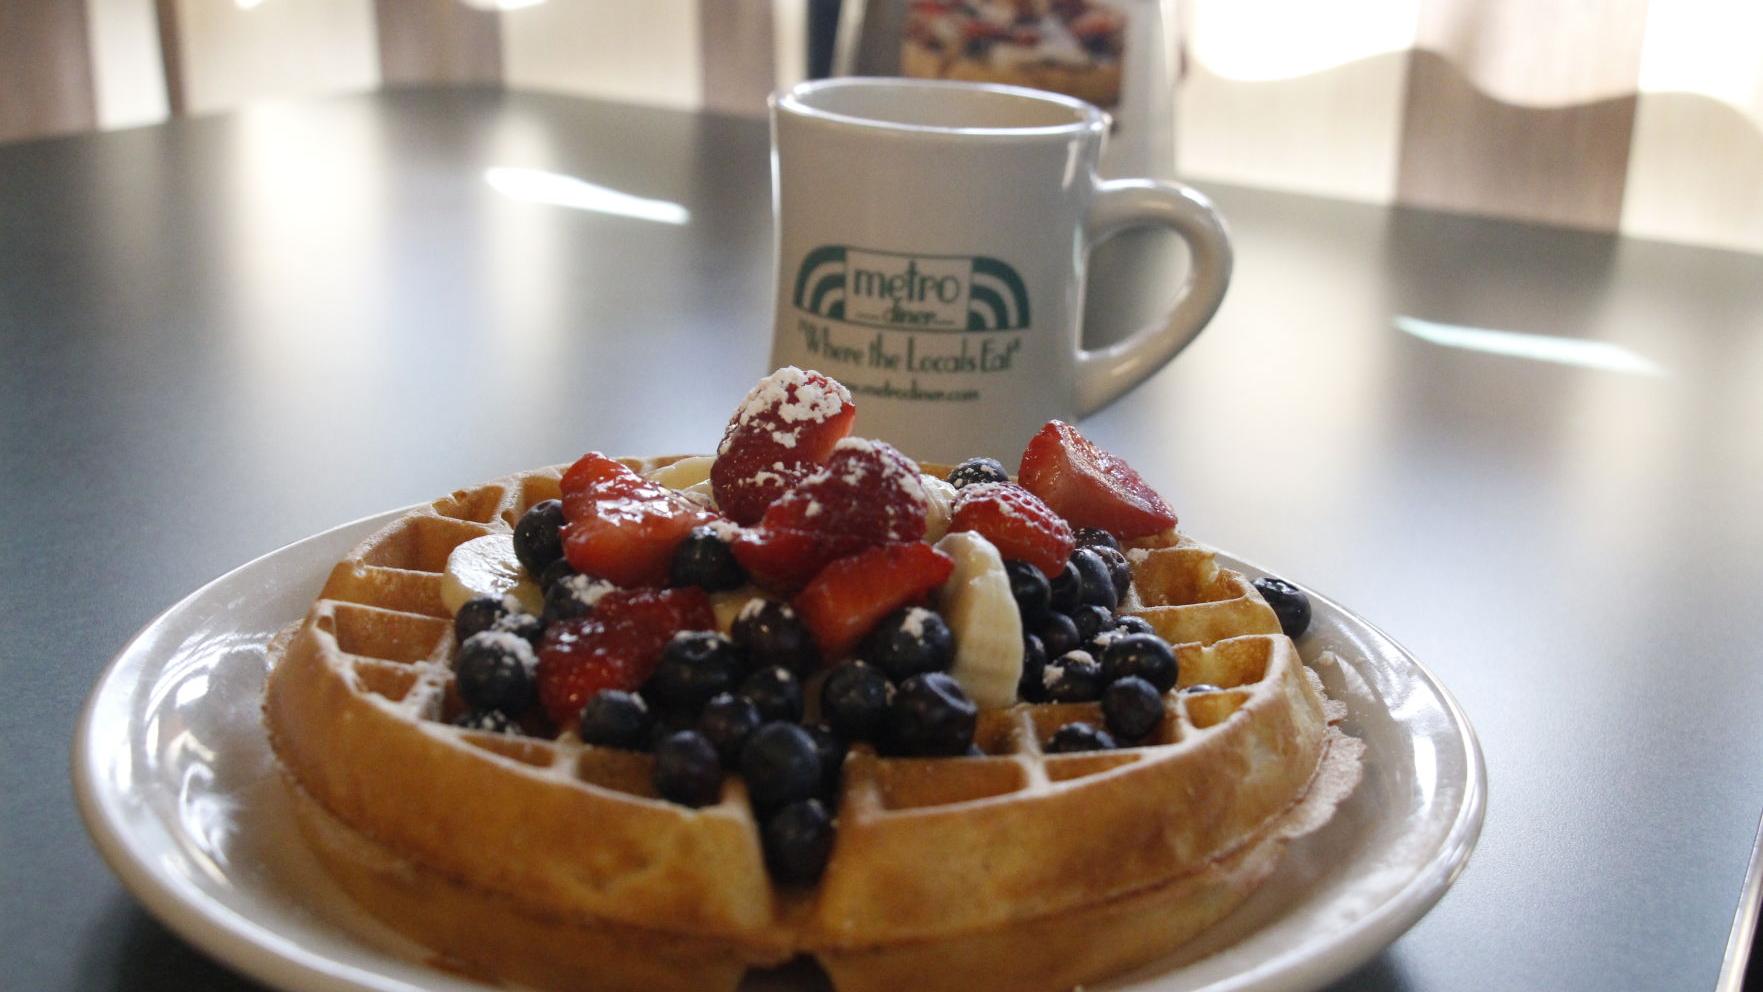 Waffles with blueberries, strawberries and bananas. ThEre is also a mug in the behind